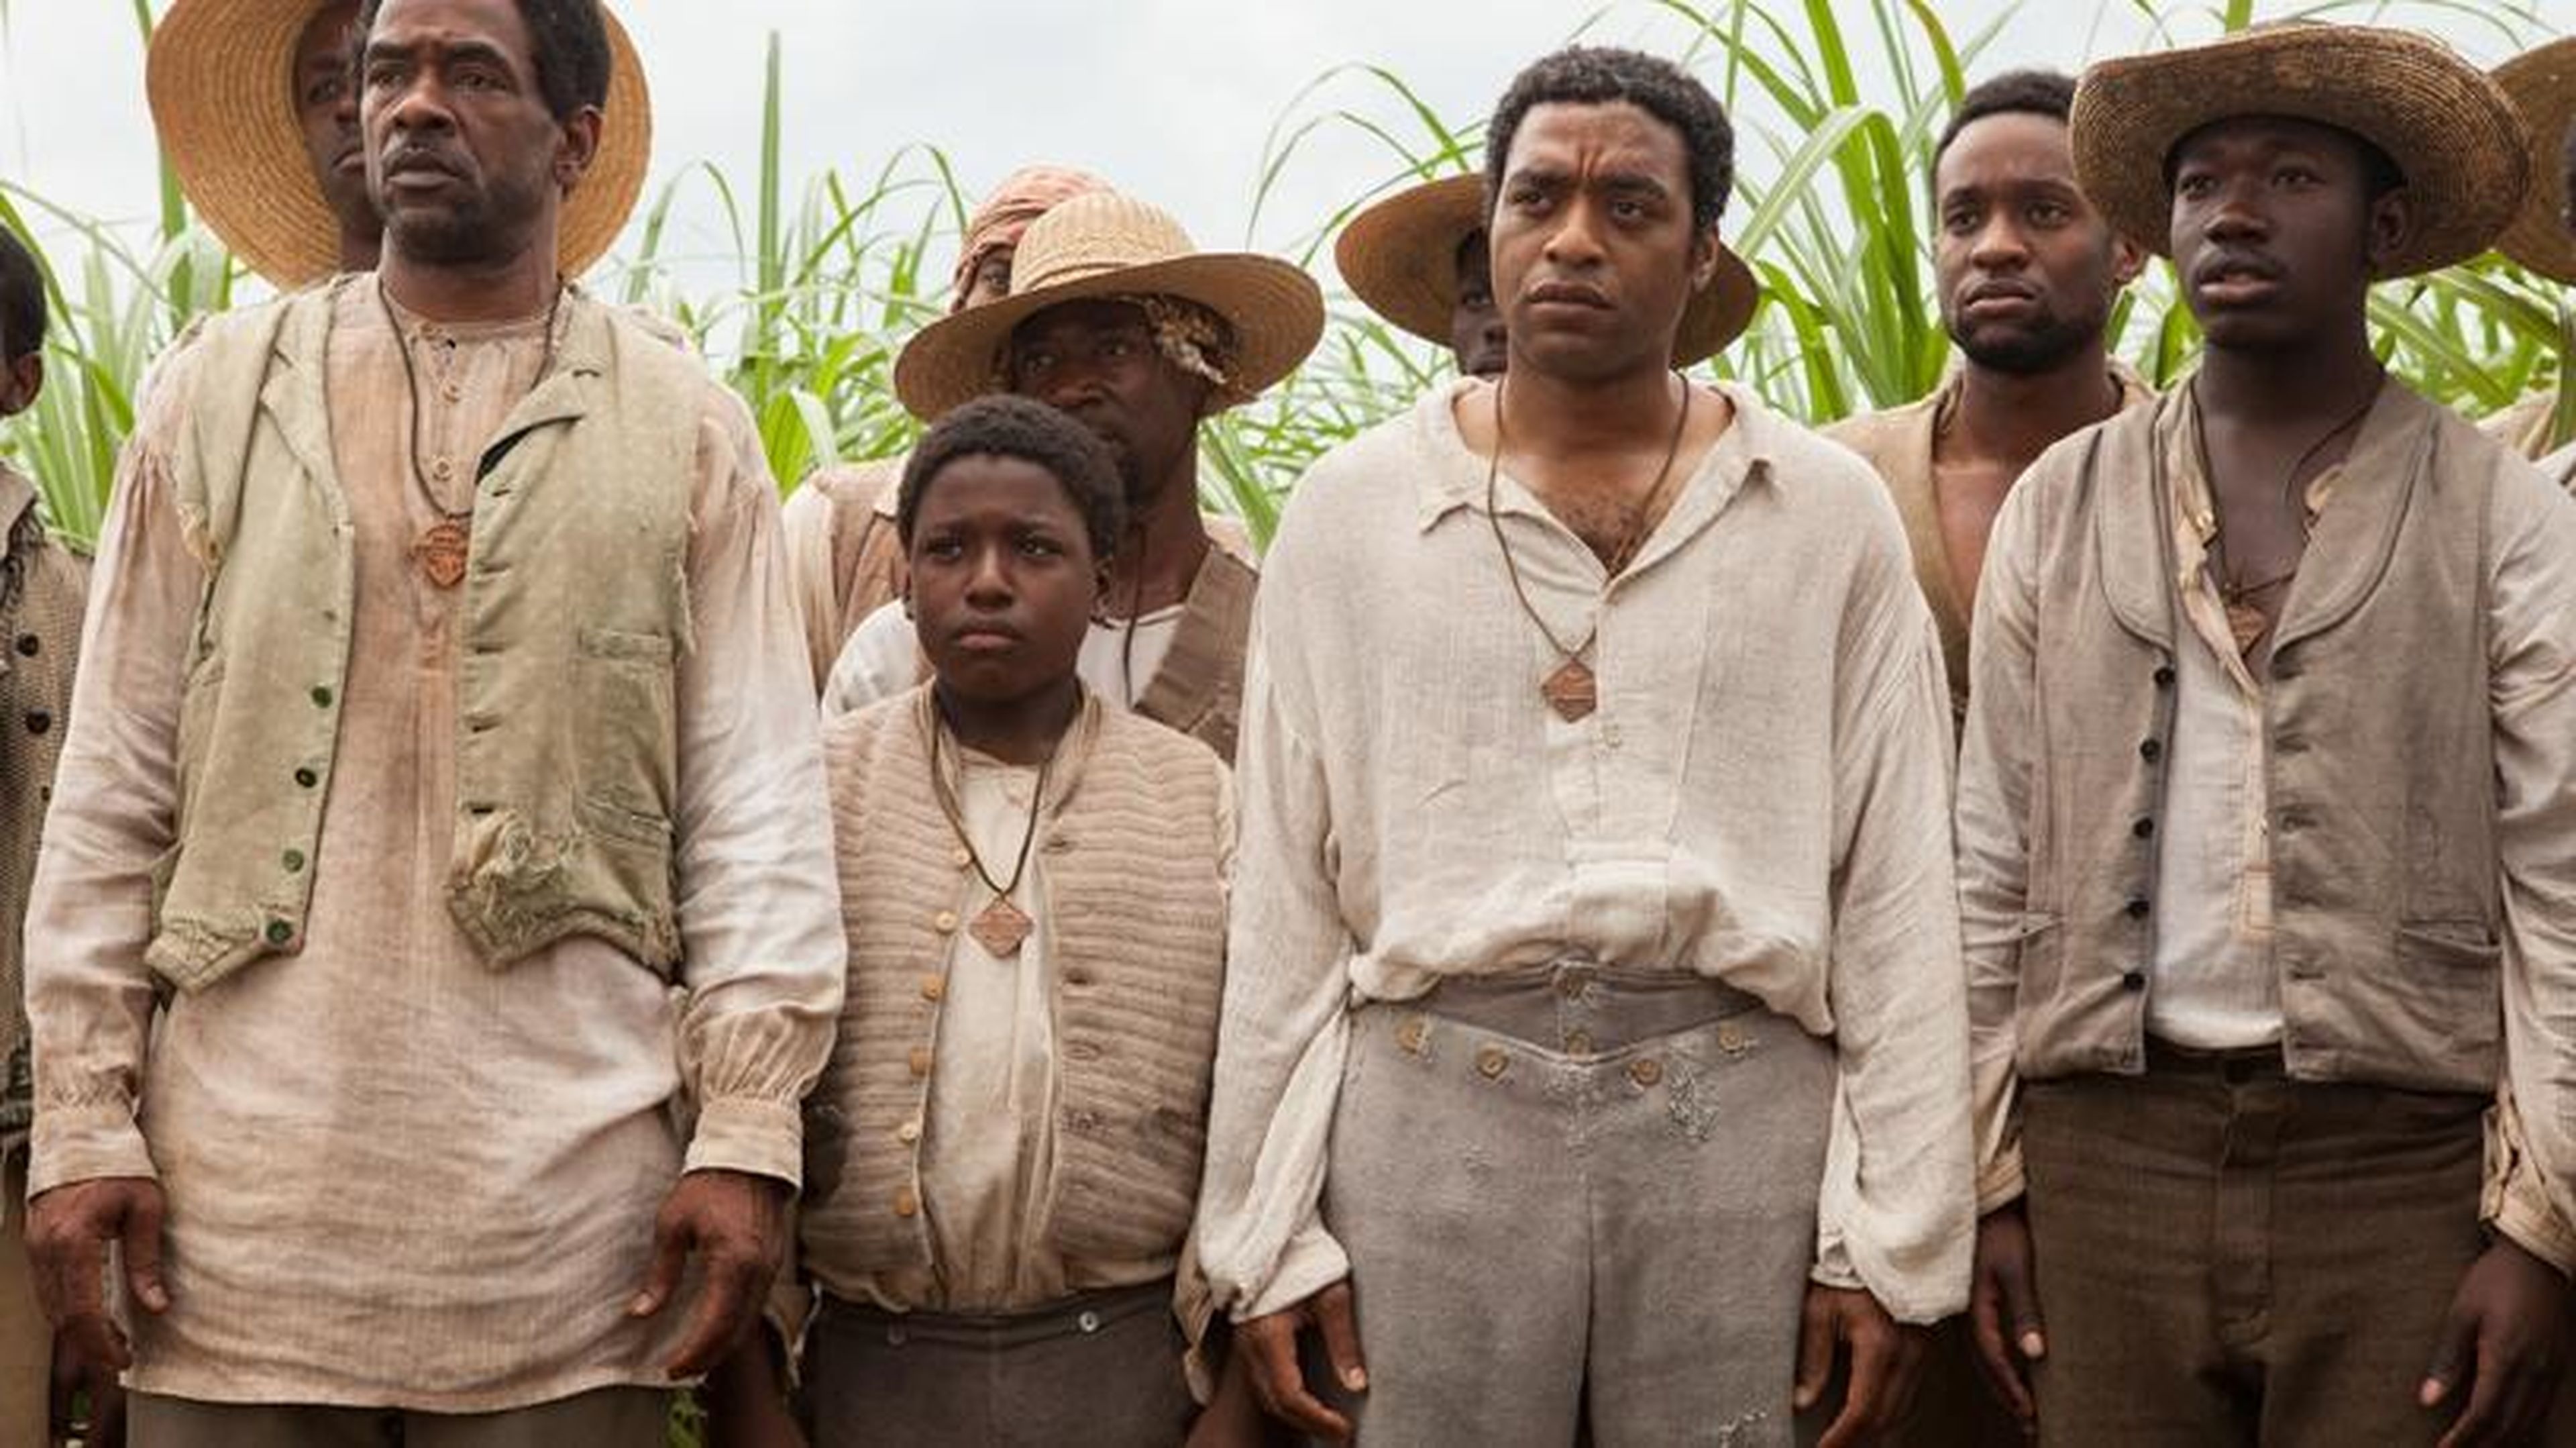 21. "12 Years a Slave" (2013)